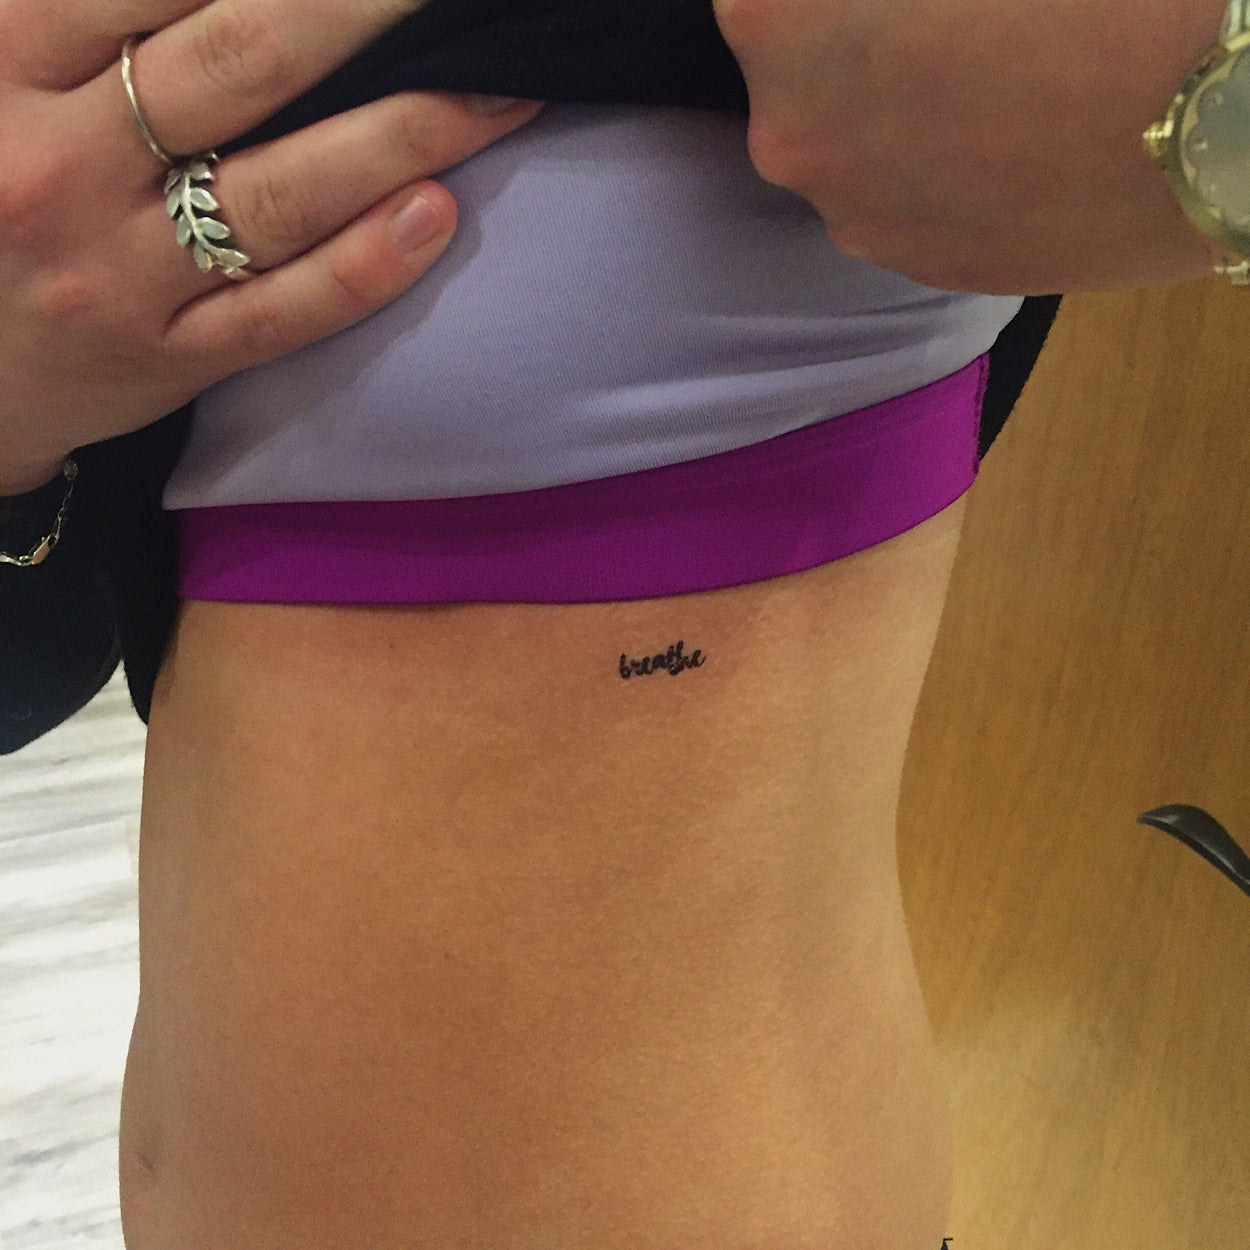 Positive "I am" Affirmations Tattoos | For daily practice of attraction, I am resilient, i am strong